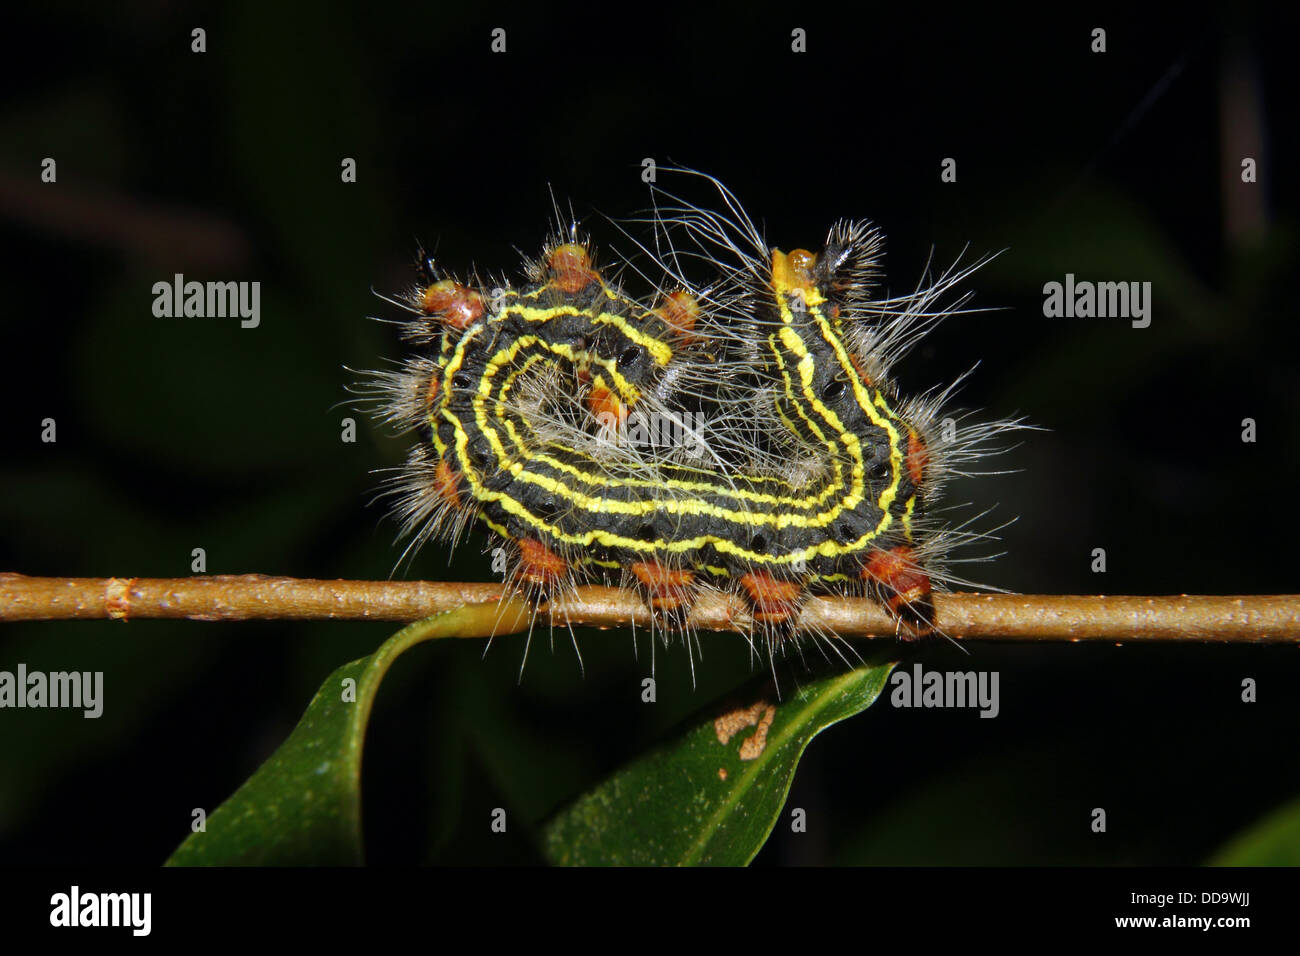 A colorful Azalea Caterpillar clings to a branch in a defensive posture. Stock Photo